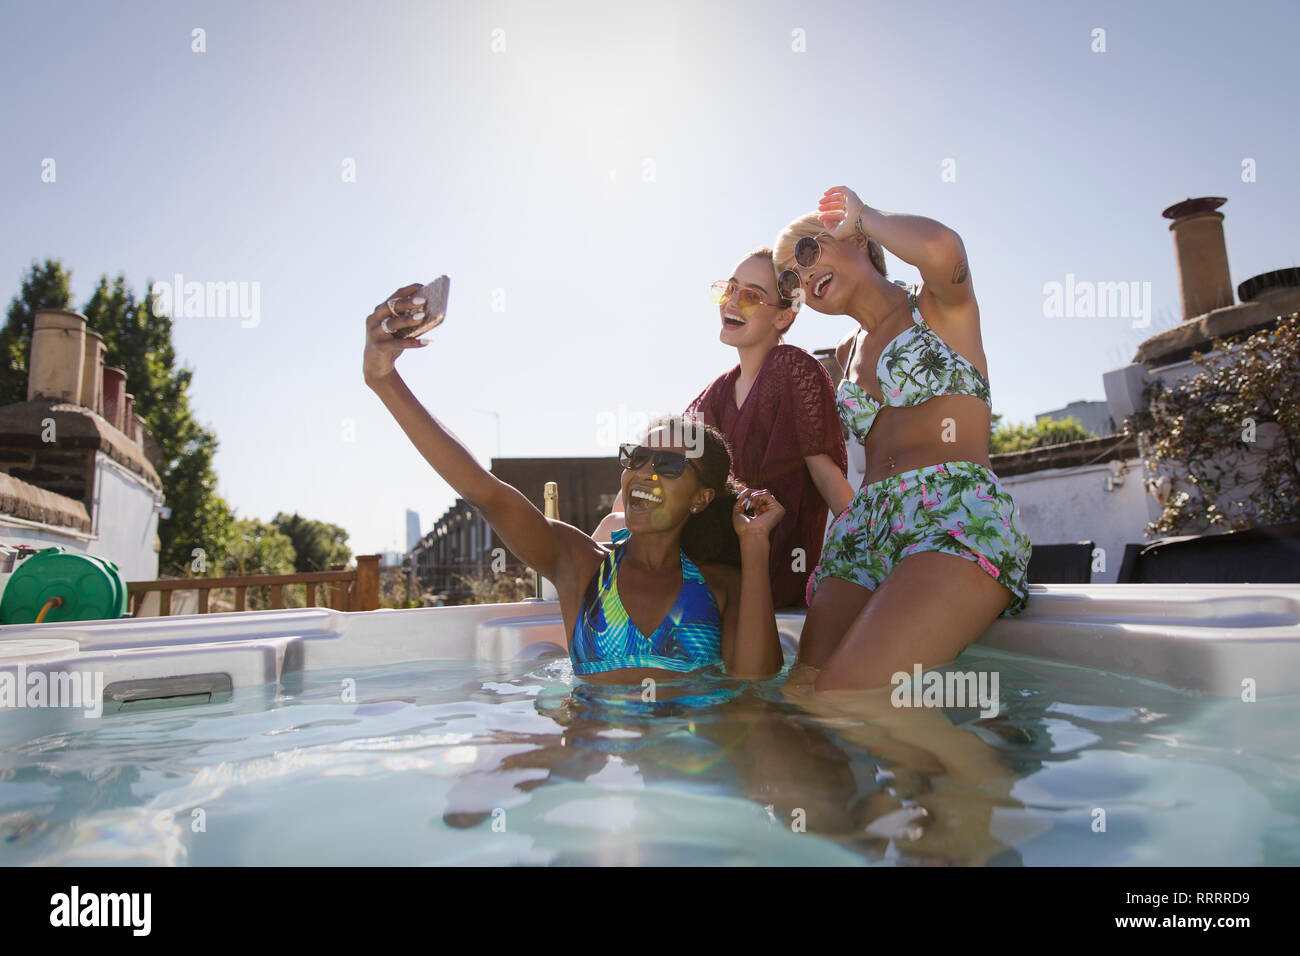 Happy, carefree young women friends in bikinis taking selfie with camera phone in sunny, rooftop hot tub Stock Photo